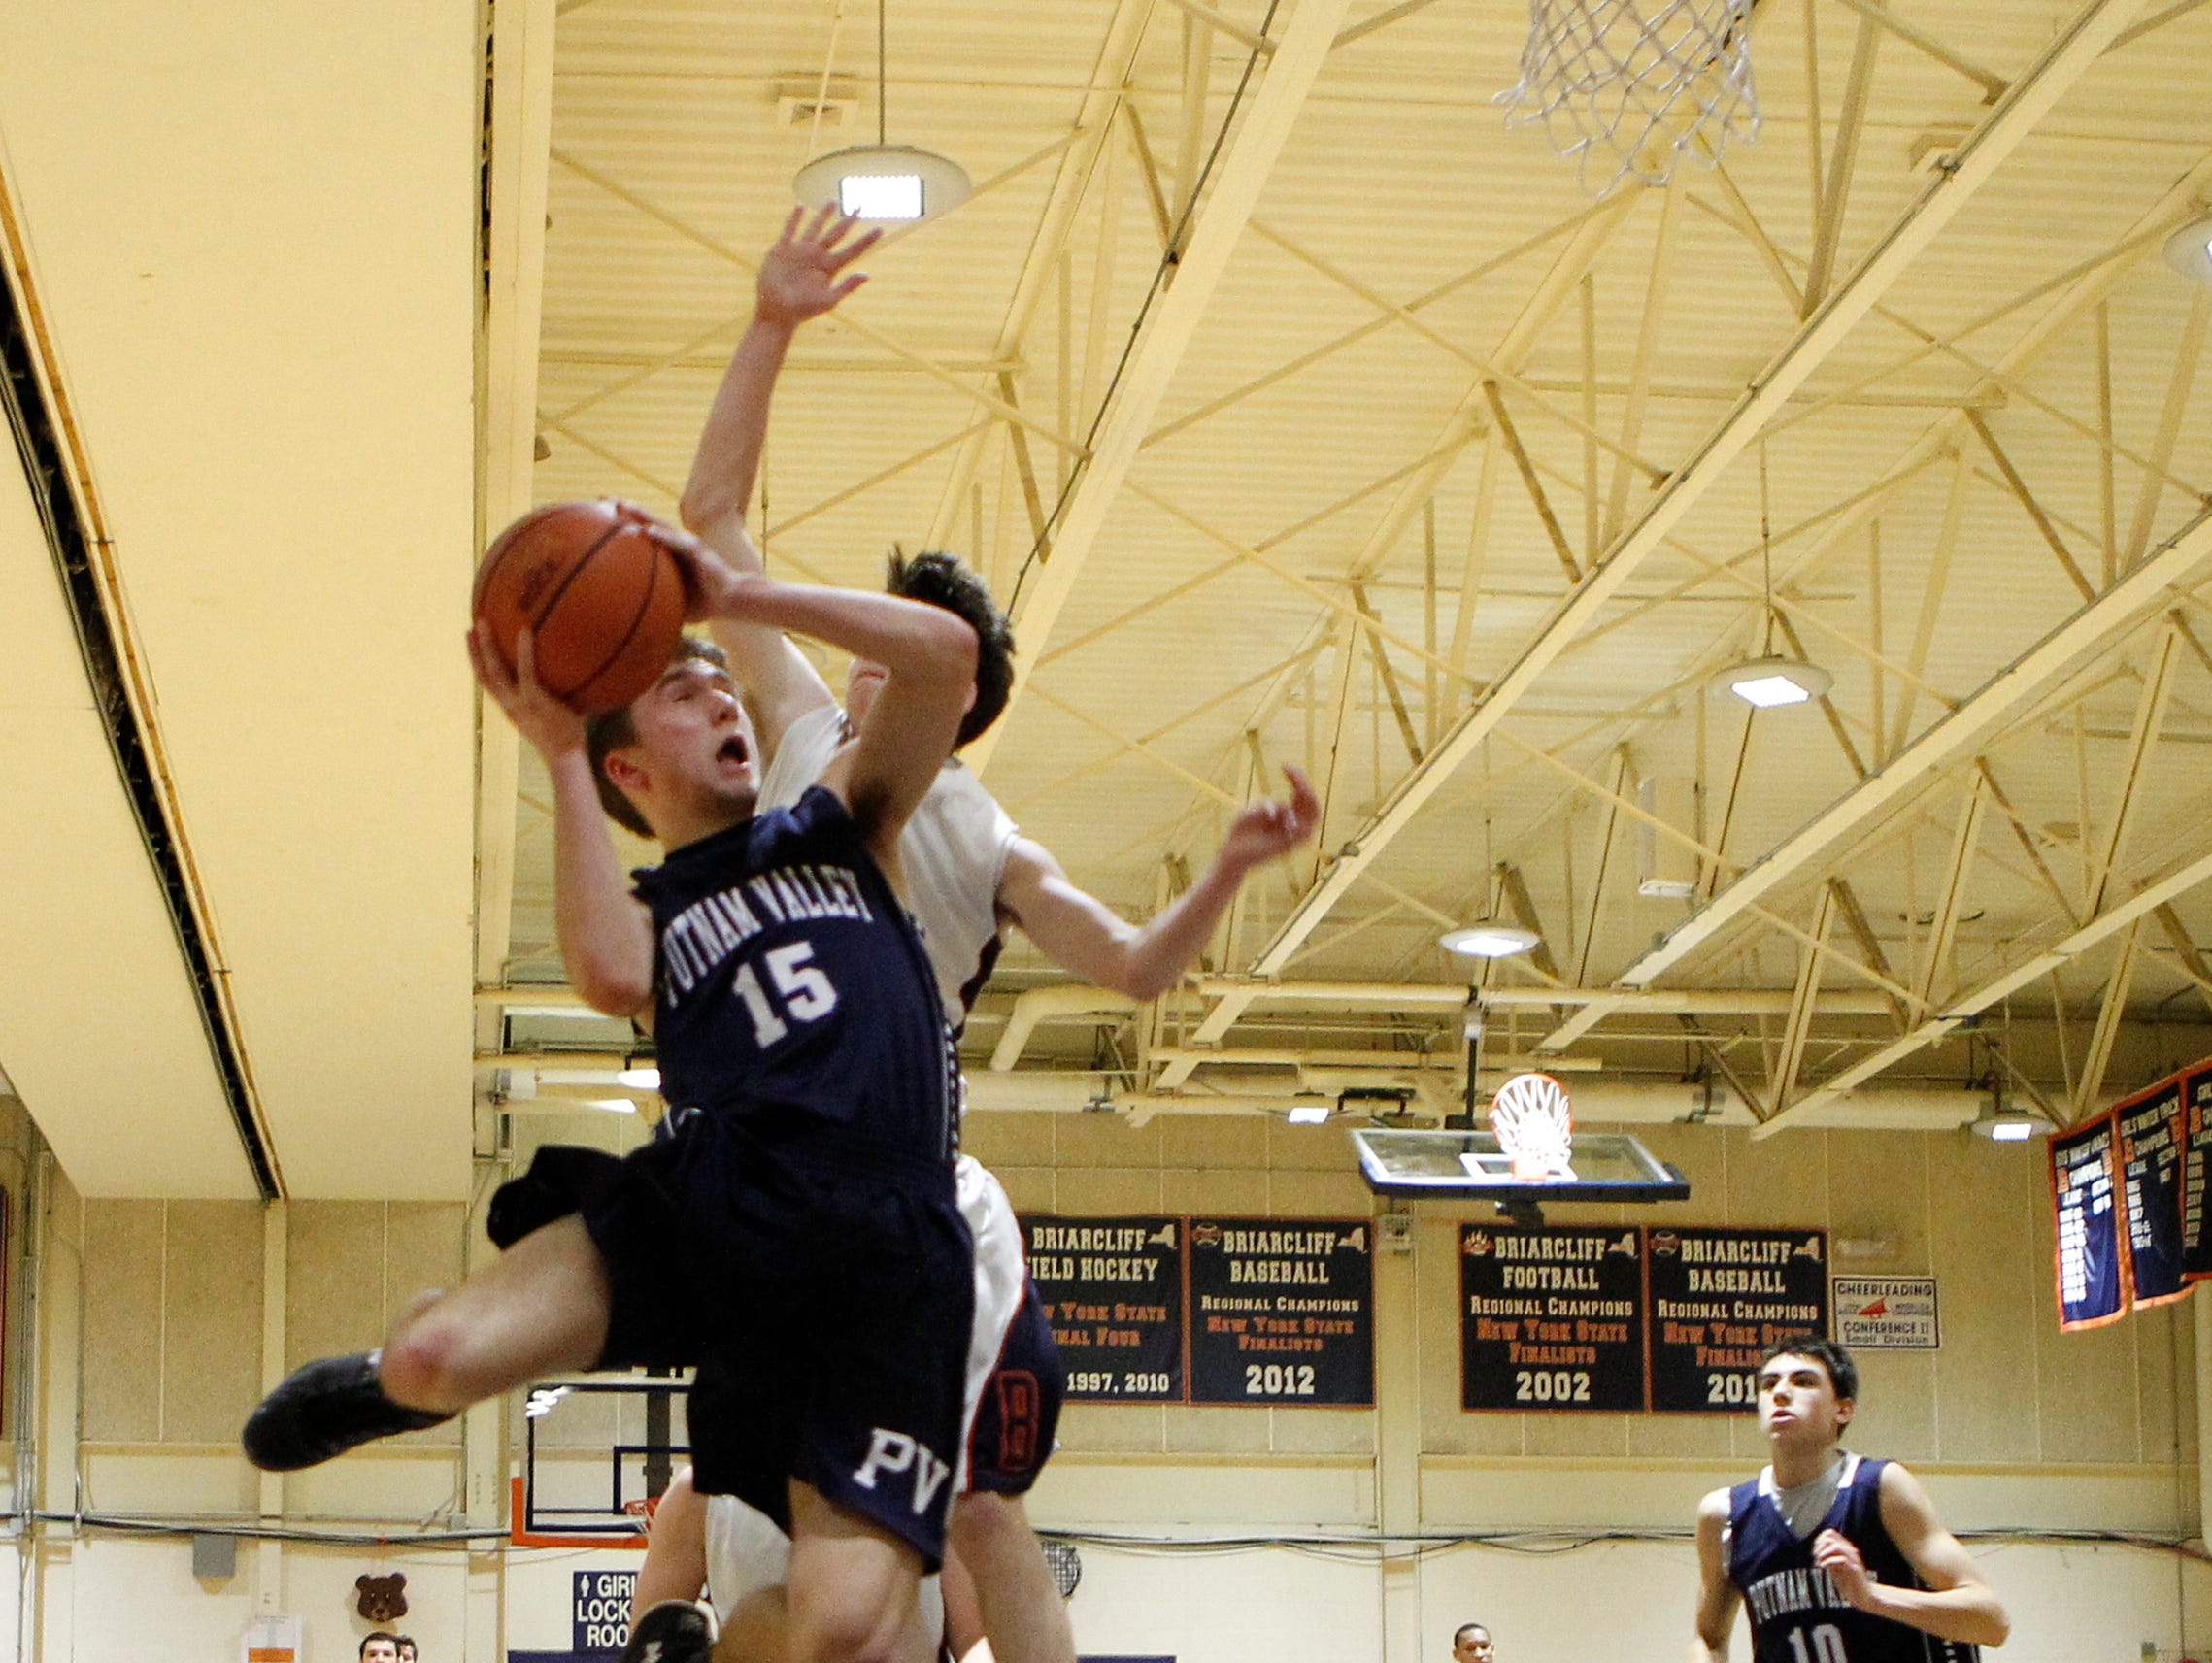 Putnam Valley guard Anders Spittal (15) drives against Briarcliff's Sean Crowley (11) at Briarcliff High School on Thursday, Jan. 7, 2016. Briarcliff won 54-48.